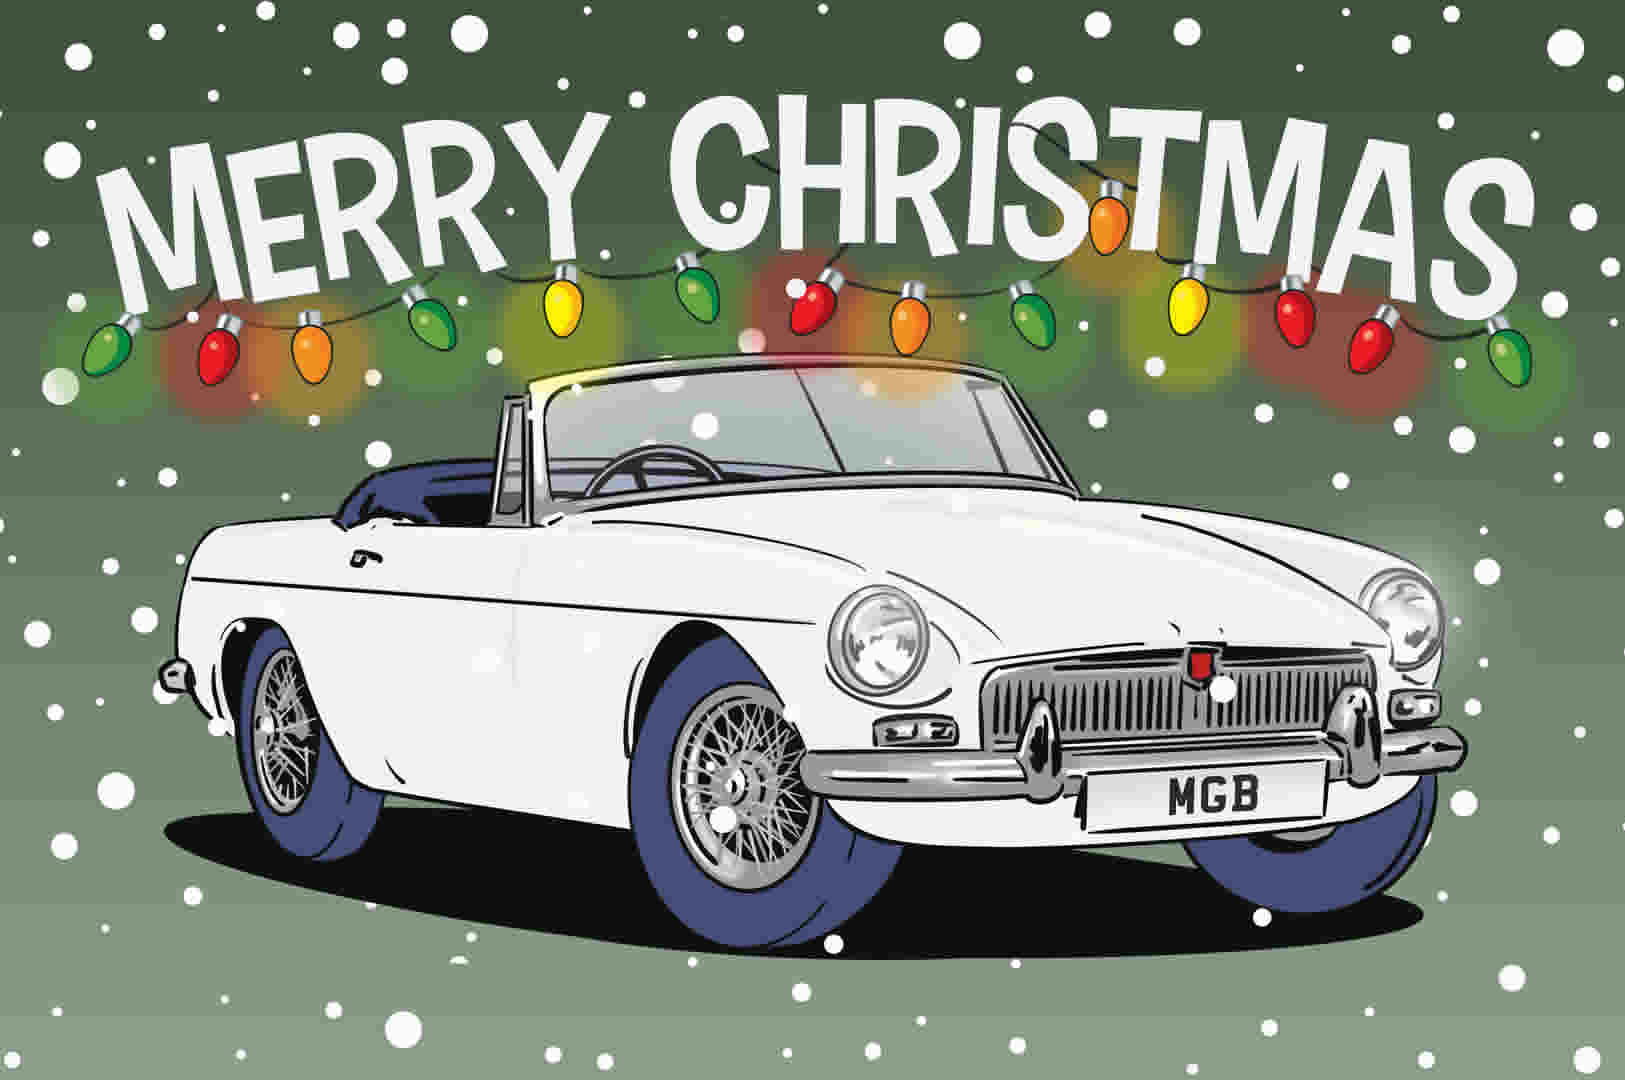 White MGB Roadster Christmas Card